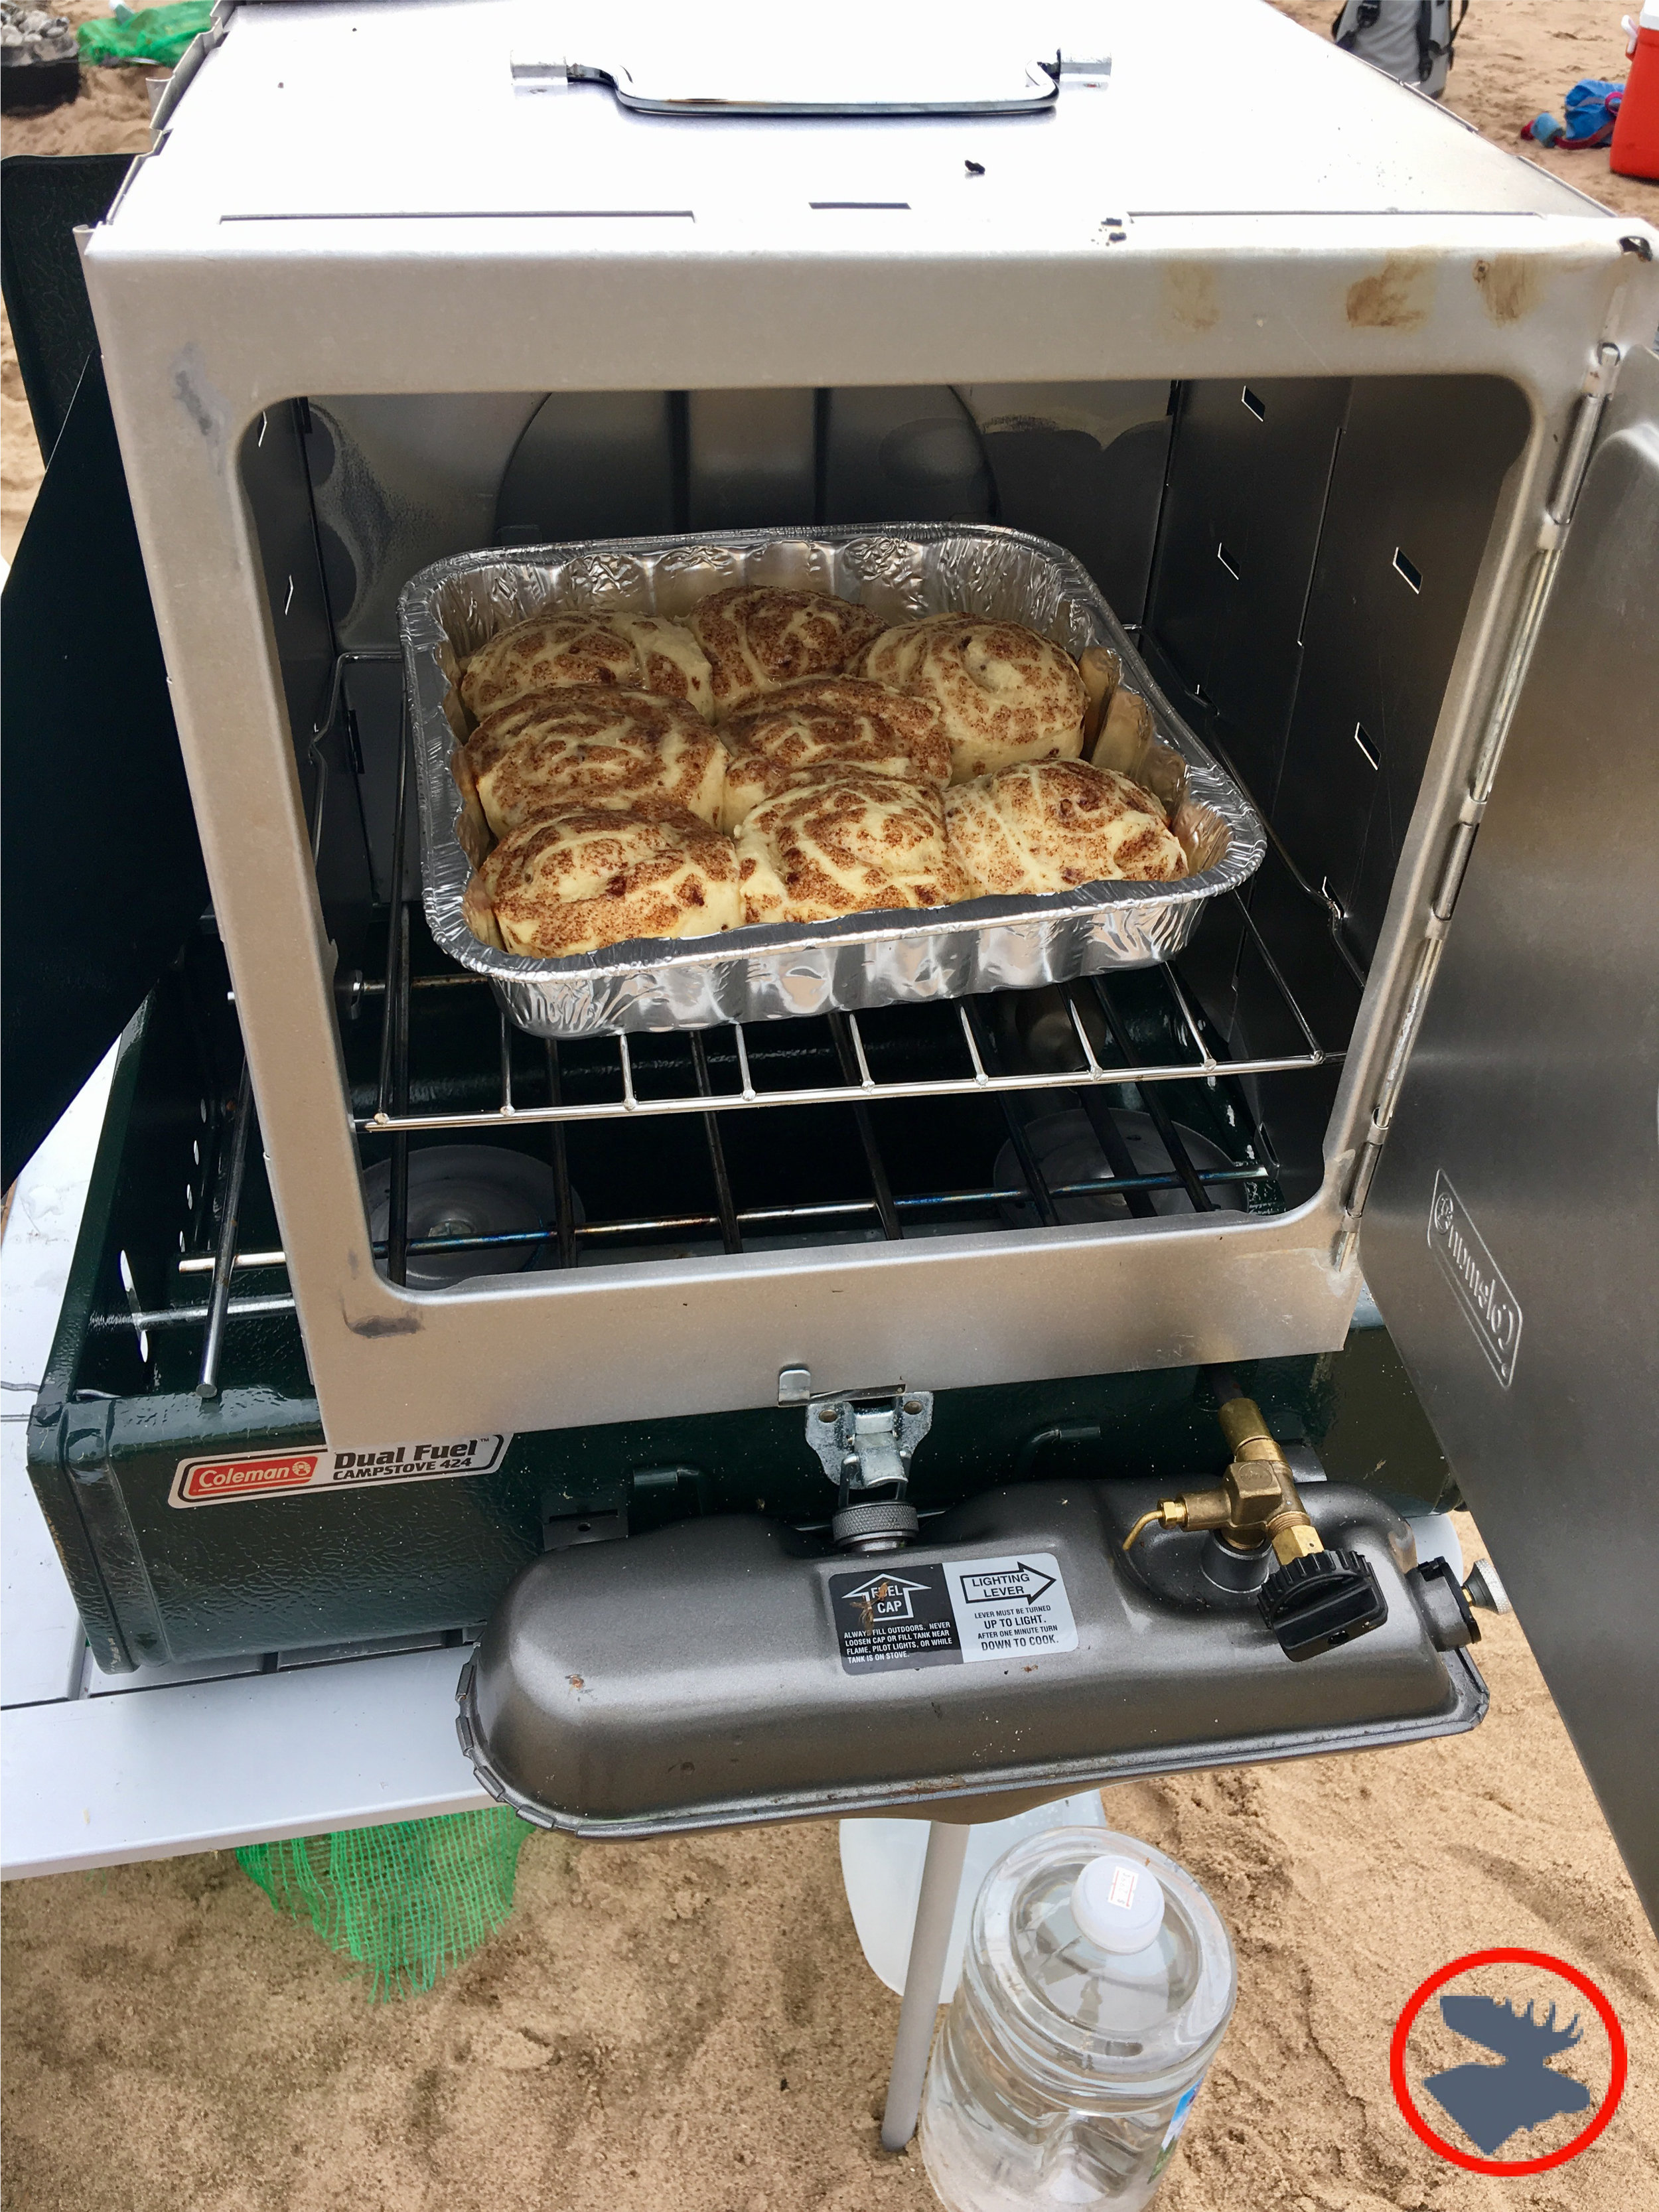 BMP-Post_Expedition-Log_WI-River_Buns-in-Oven_8-18-17.jpg